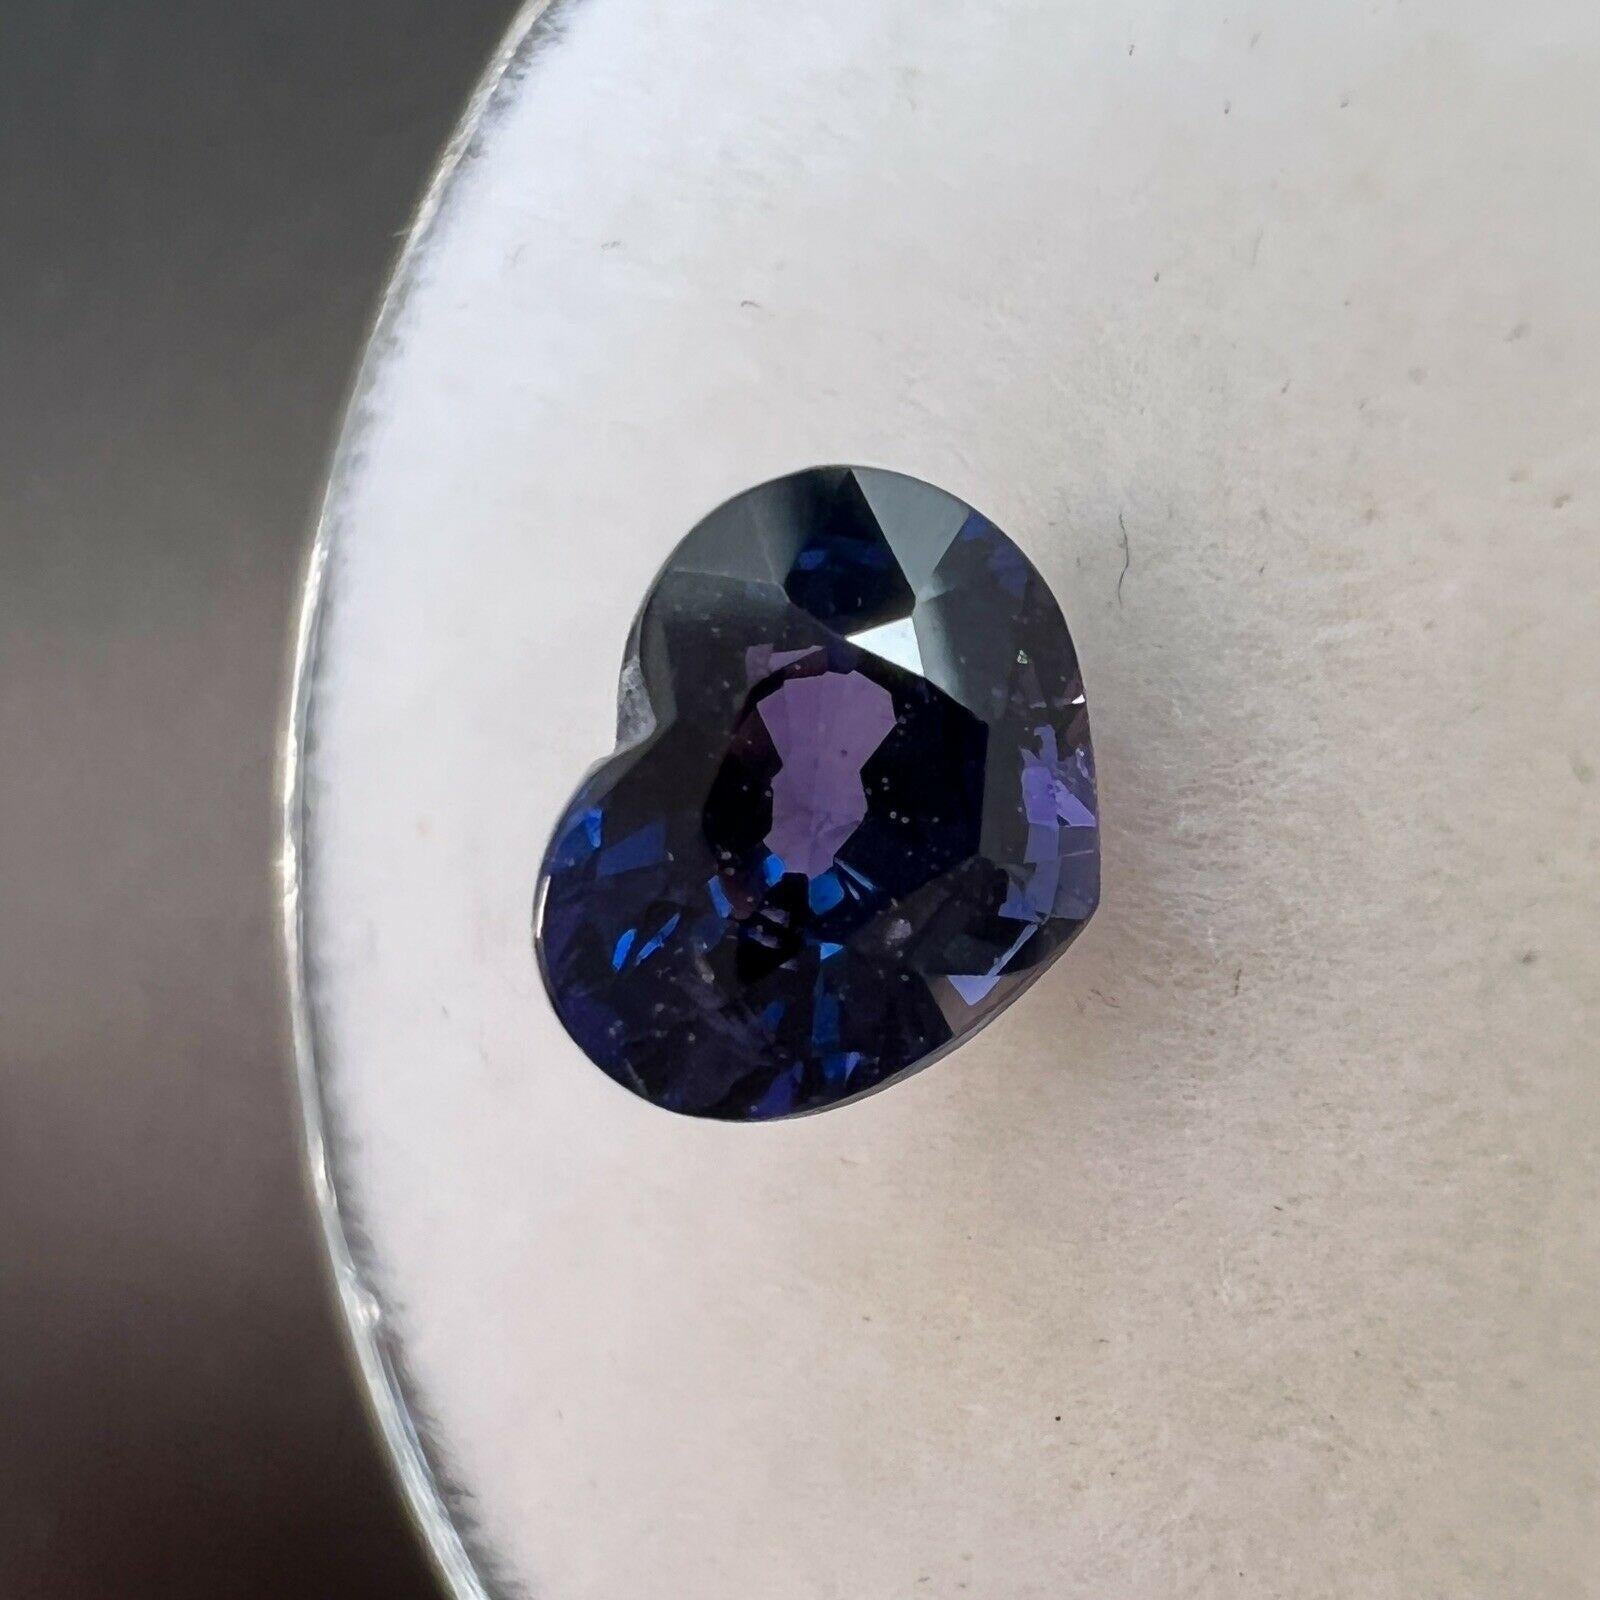 1.18ct Fine Deep Purple Sapphire Heart Cut Rare Loose Cut Gem 6.8x5.3mm

Natural Deep Purple Sapphire Gemstone.
1.18 Carat with a beautiful deep purple colour and good clarity, some small natural inclusions visible when looking closely. Also has an